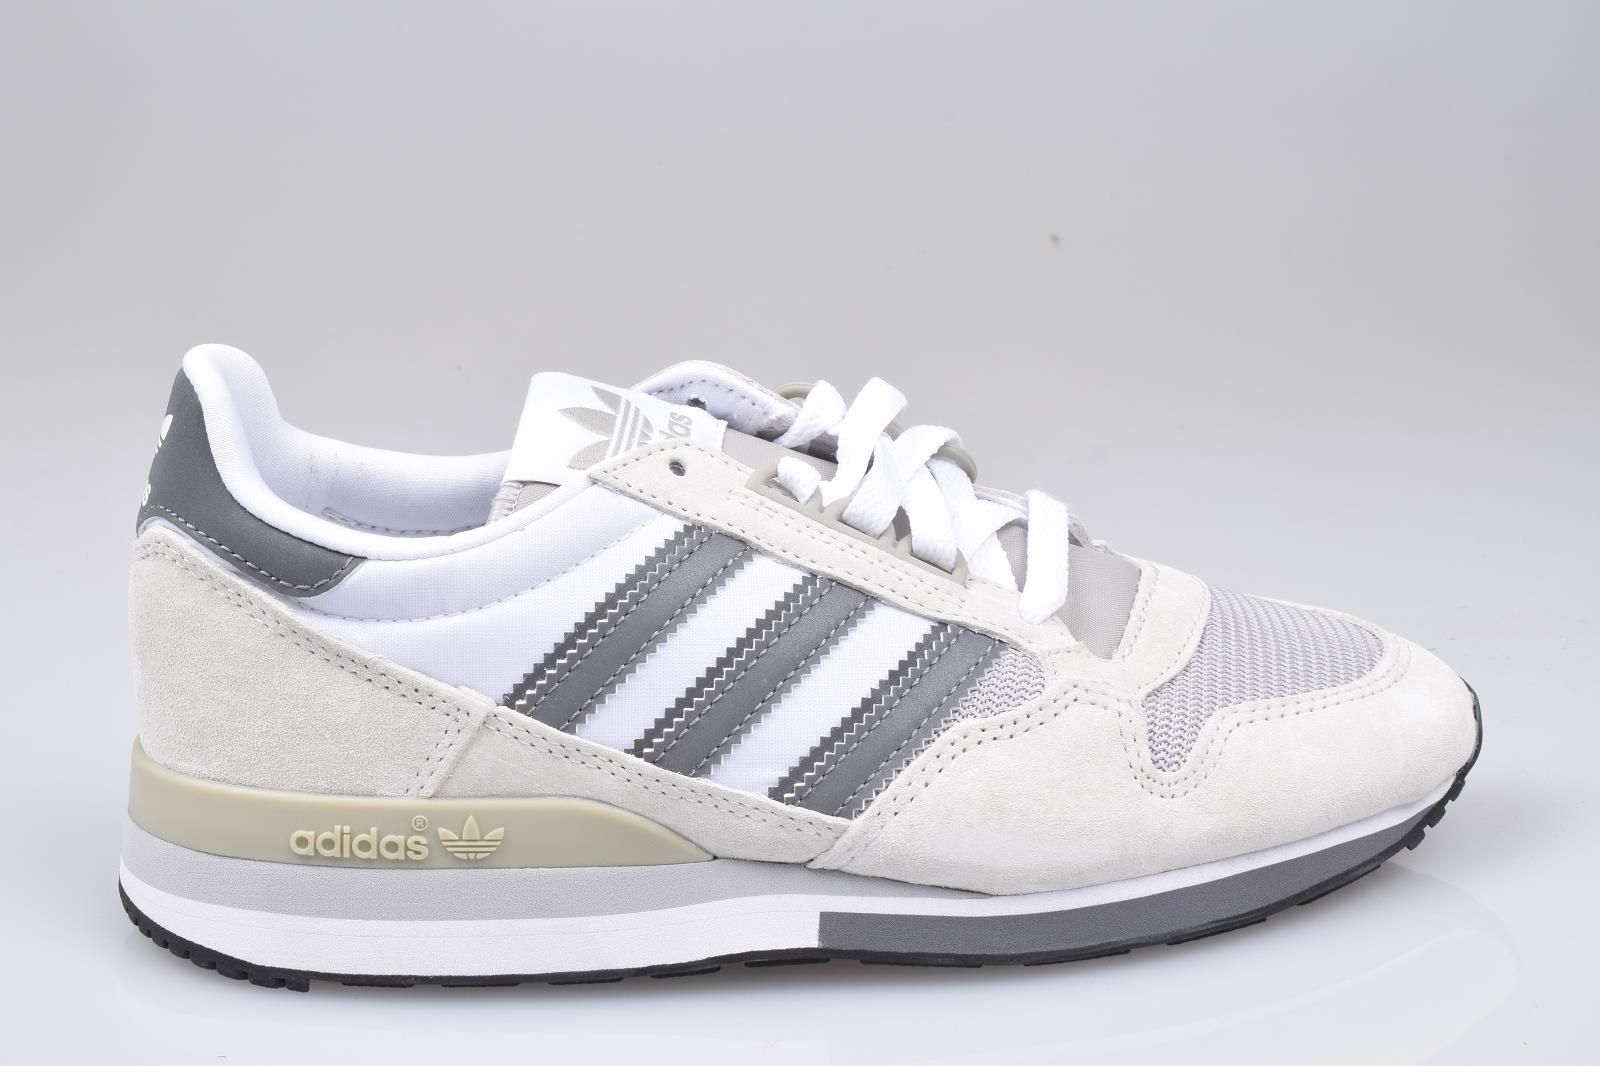 ADIDAS Veter Grijs dames (ADIDAS ZX 700 - H02112 OrbGry/GreFou/FtwWht) -  Mayday (Aalst)